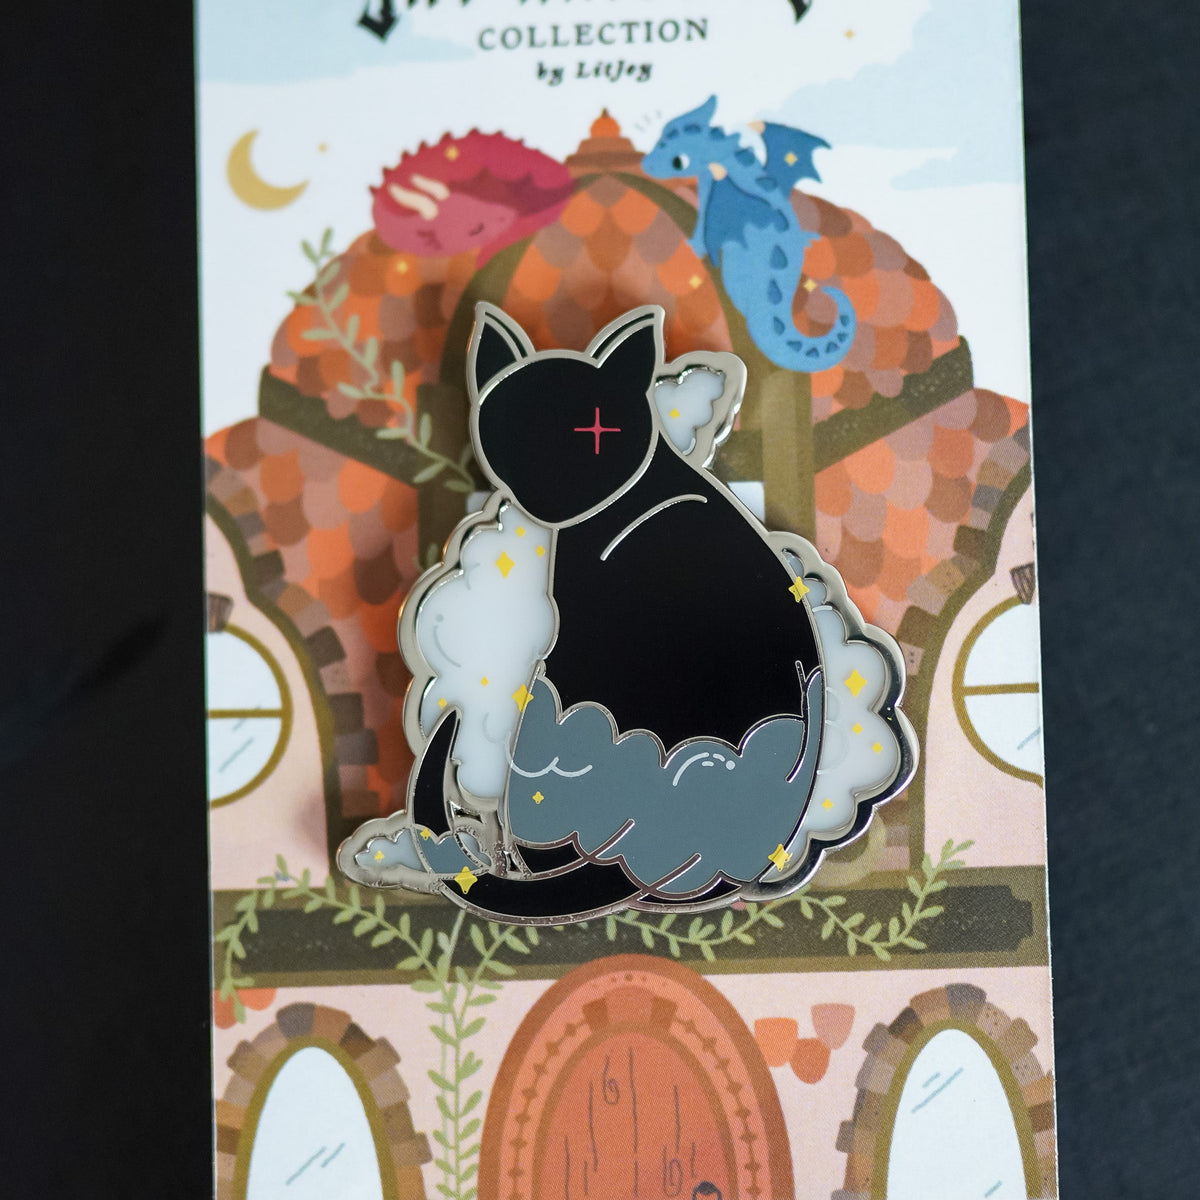 Mister Kindly Critter Collection Enamel Pin displaying a black cat surrounded by sparkles and mist inspired by the shadow daemon in Nevernight by Jay Kristoff.